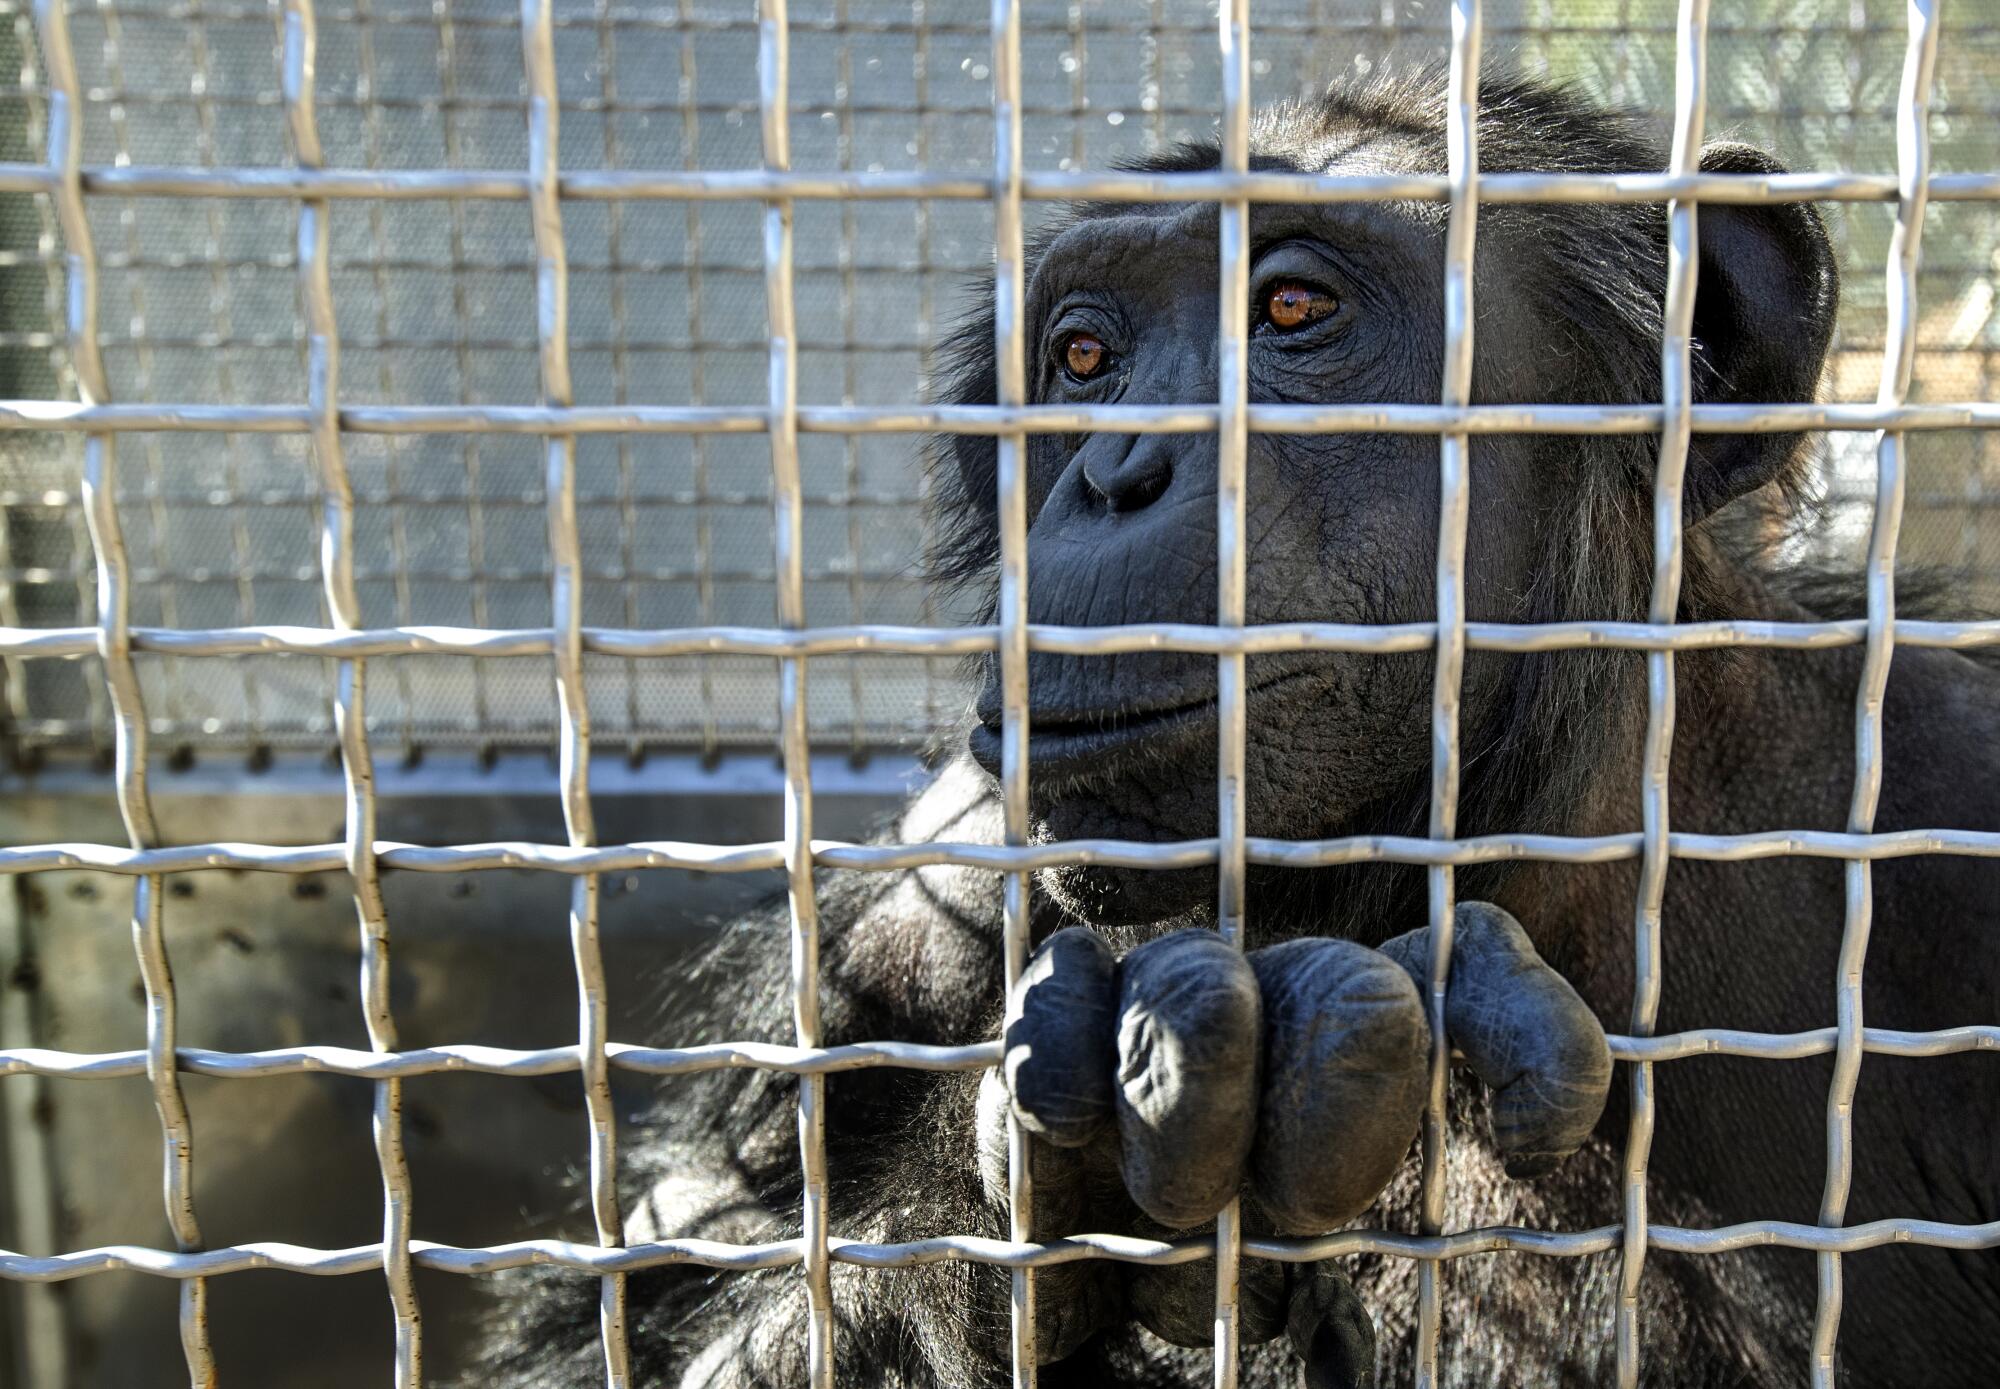 A chimpanzee with her fingers in the grating of a metal cage